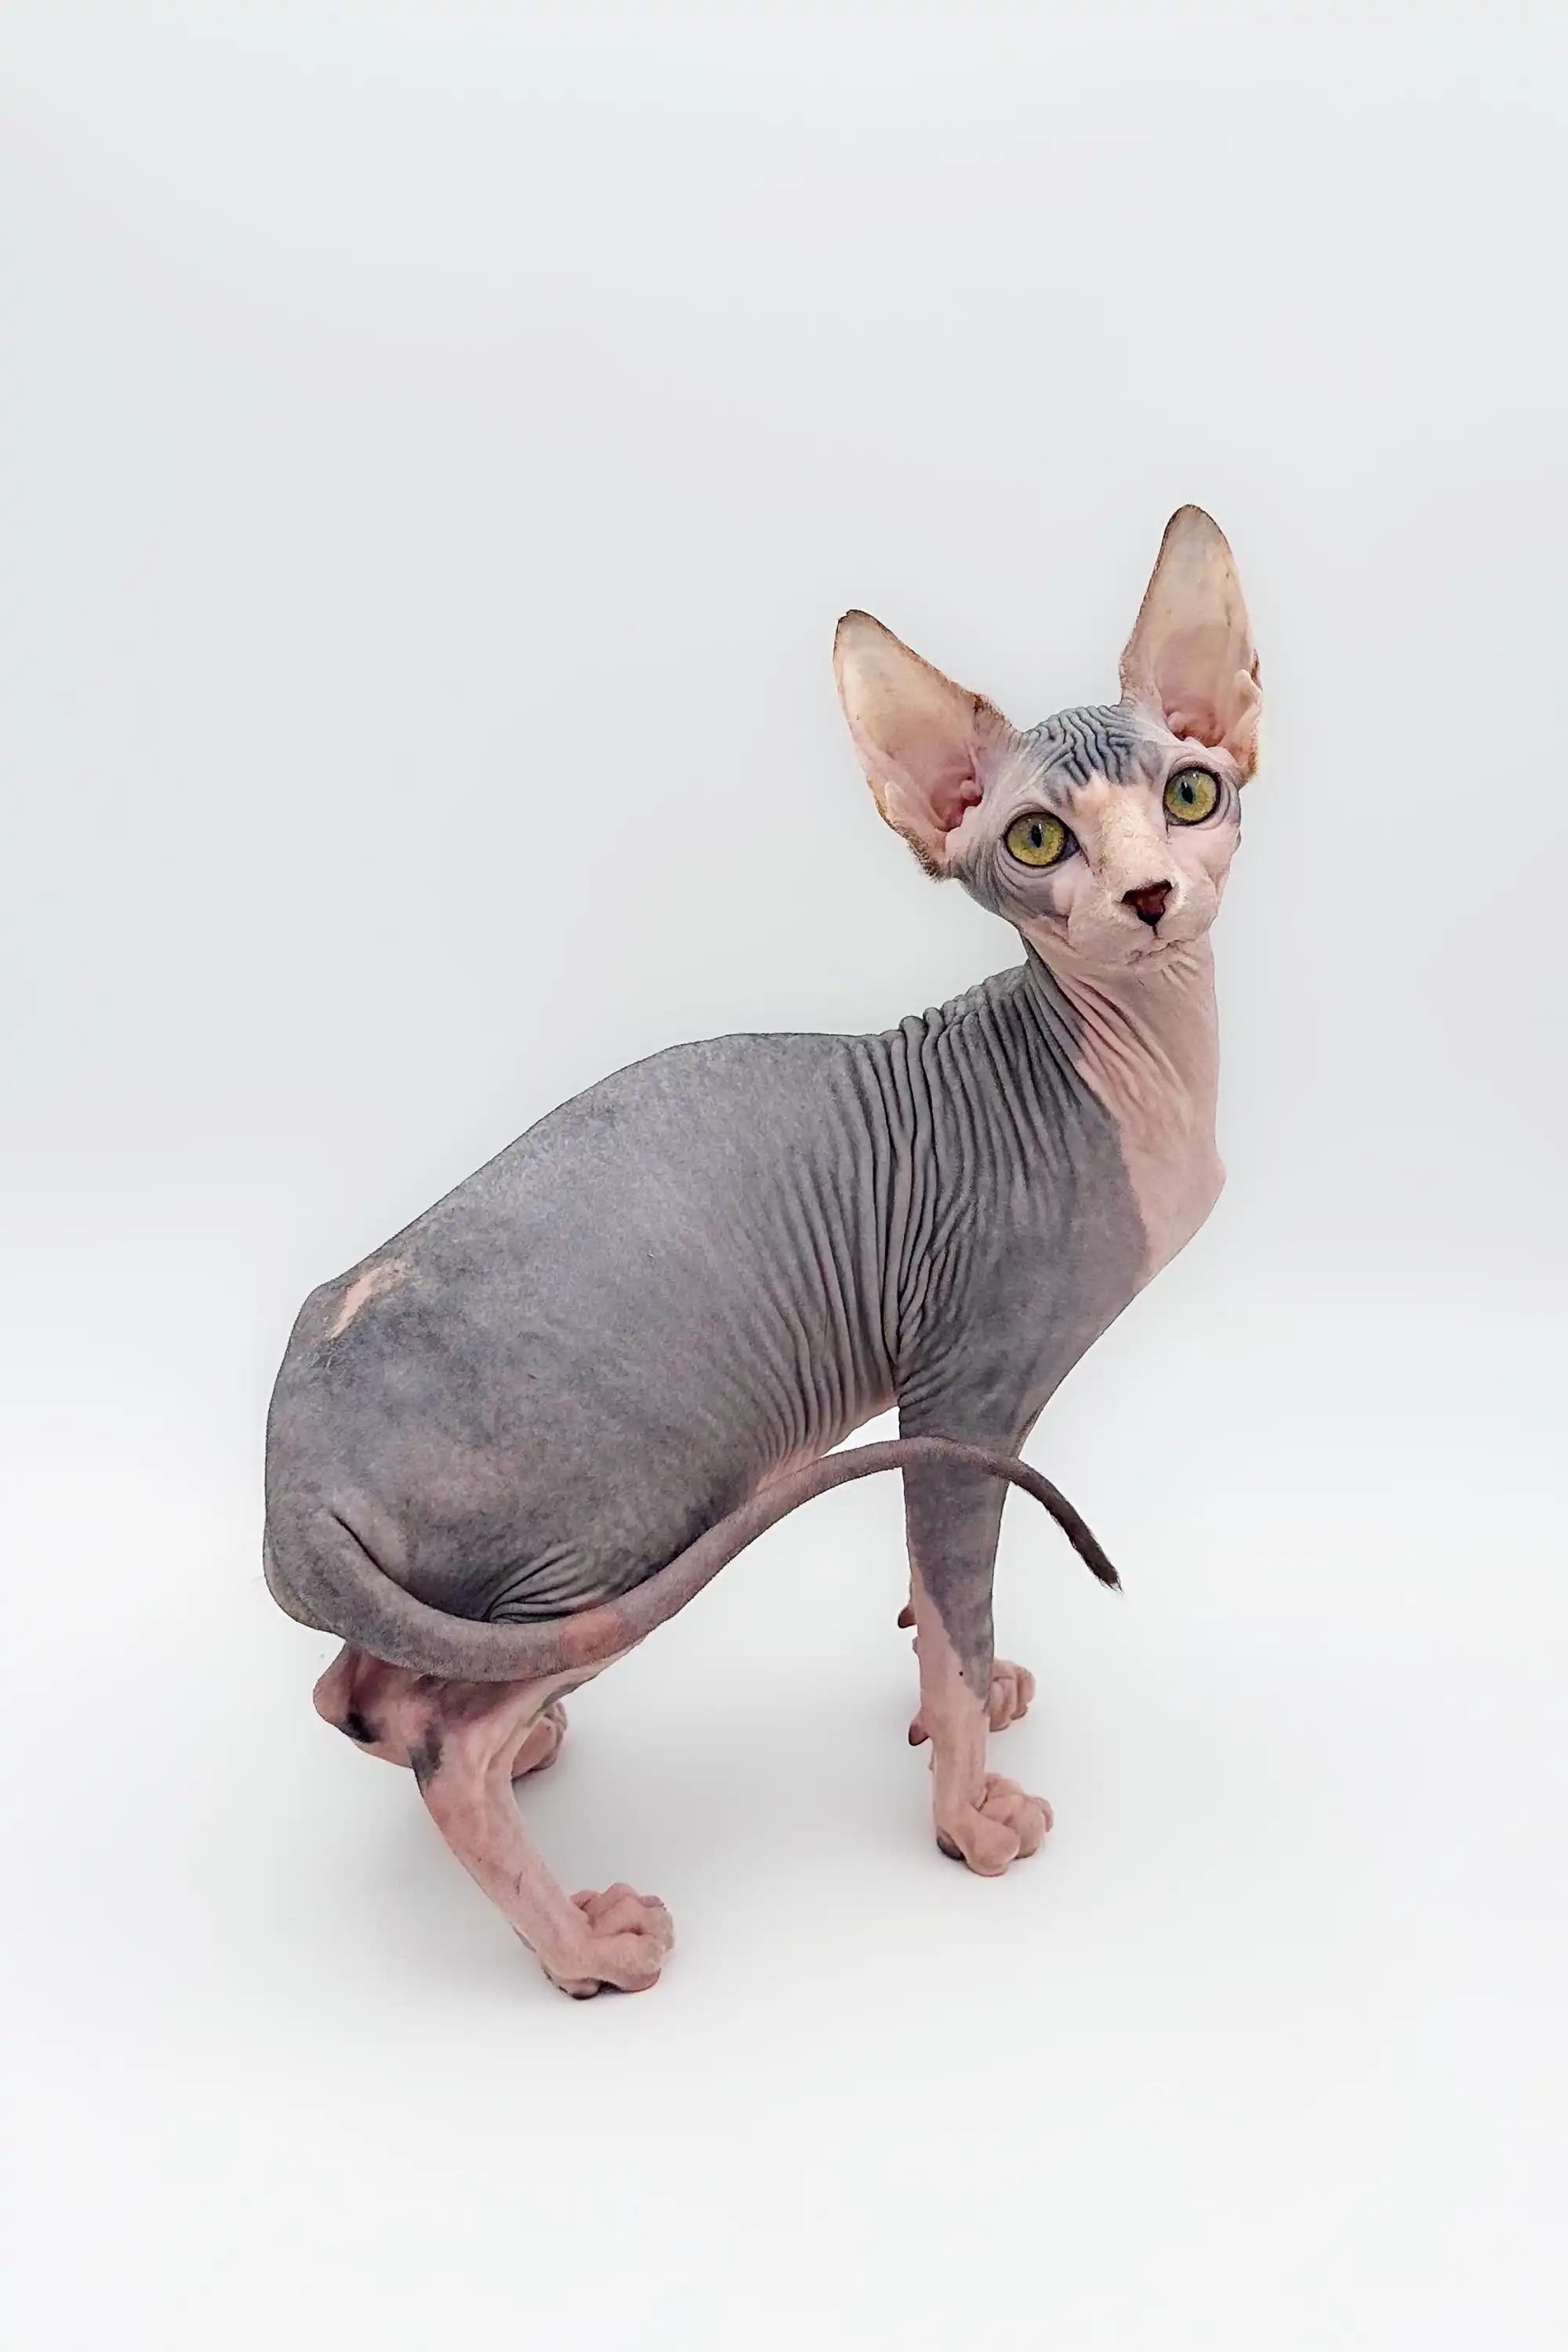 Sphynx Cats and Kittens for Sale Denny | Kitten